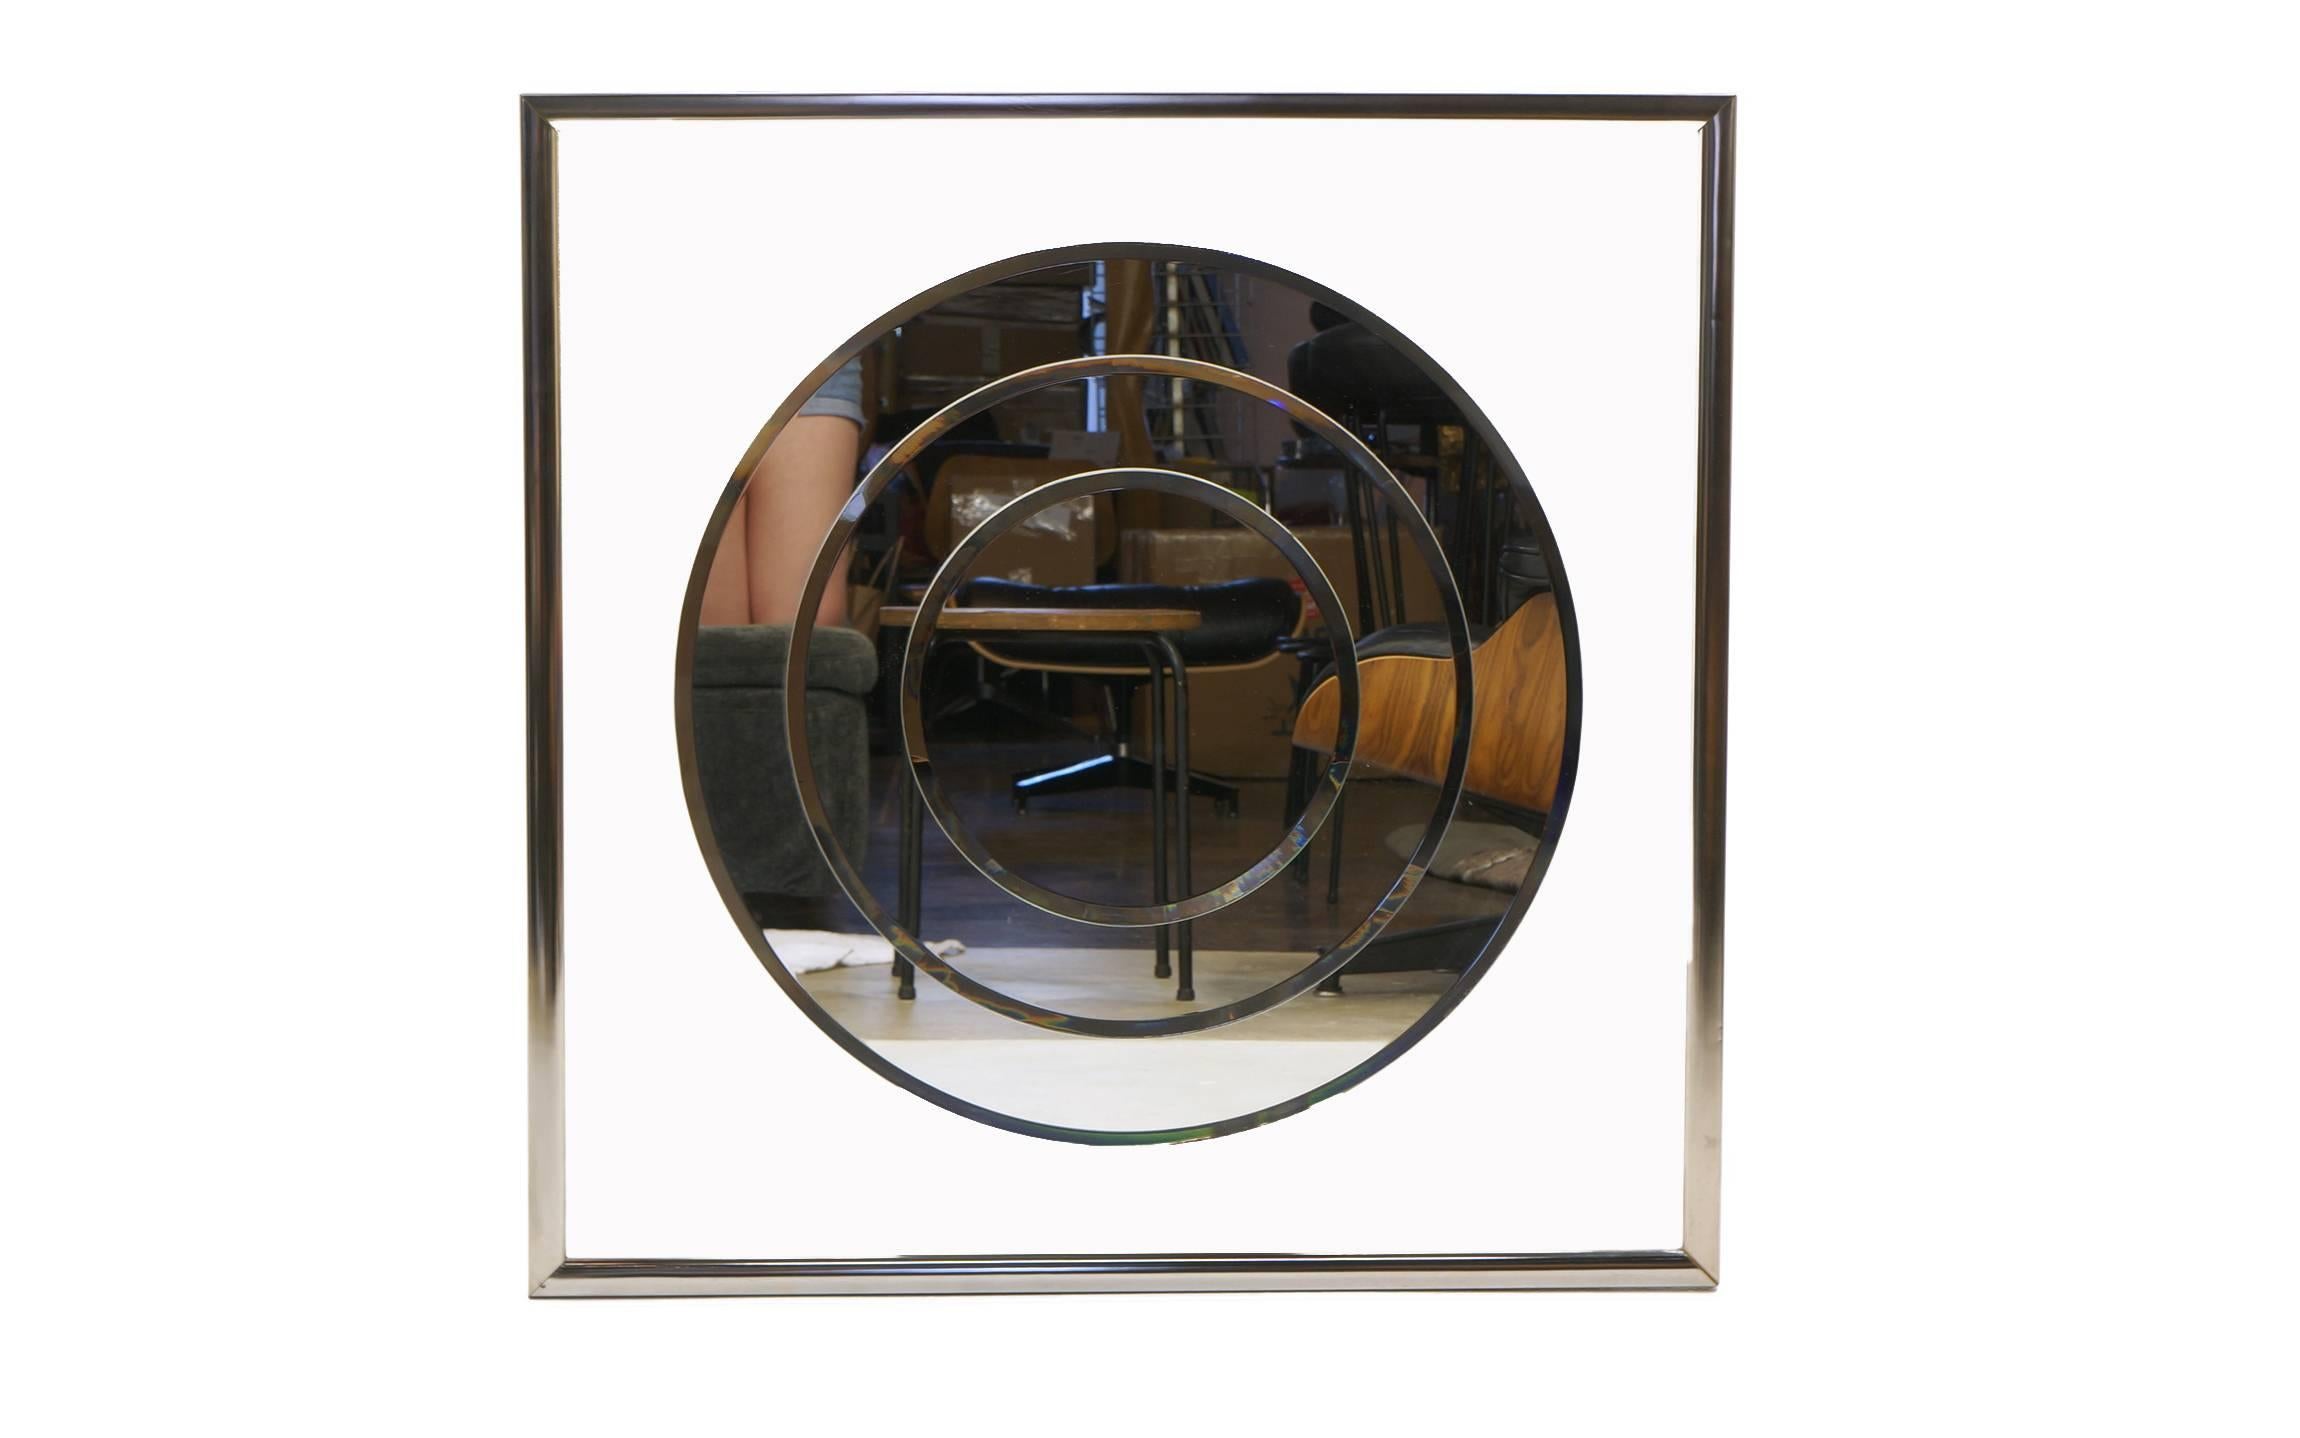 Mid-Century Modern Wall Mirror of Concentric Circles with Chrome Frame by the Mitre Shop, 1975